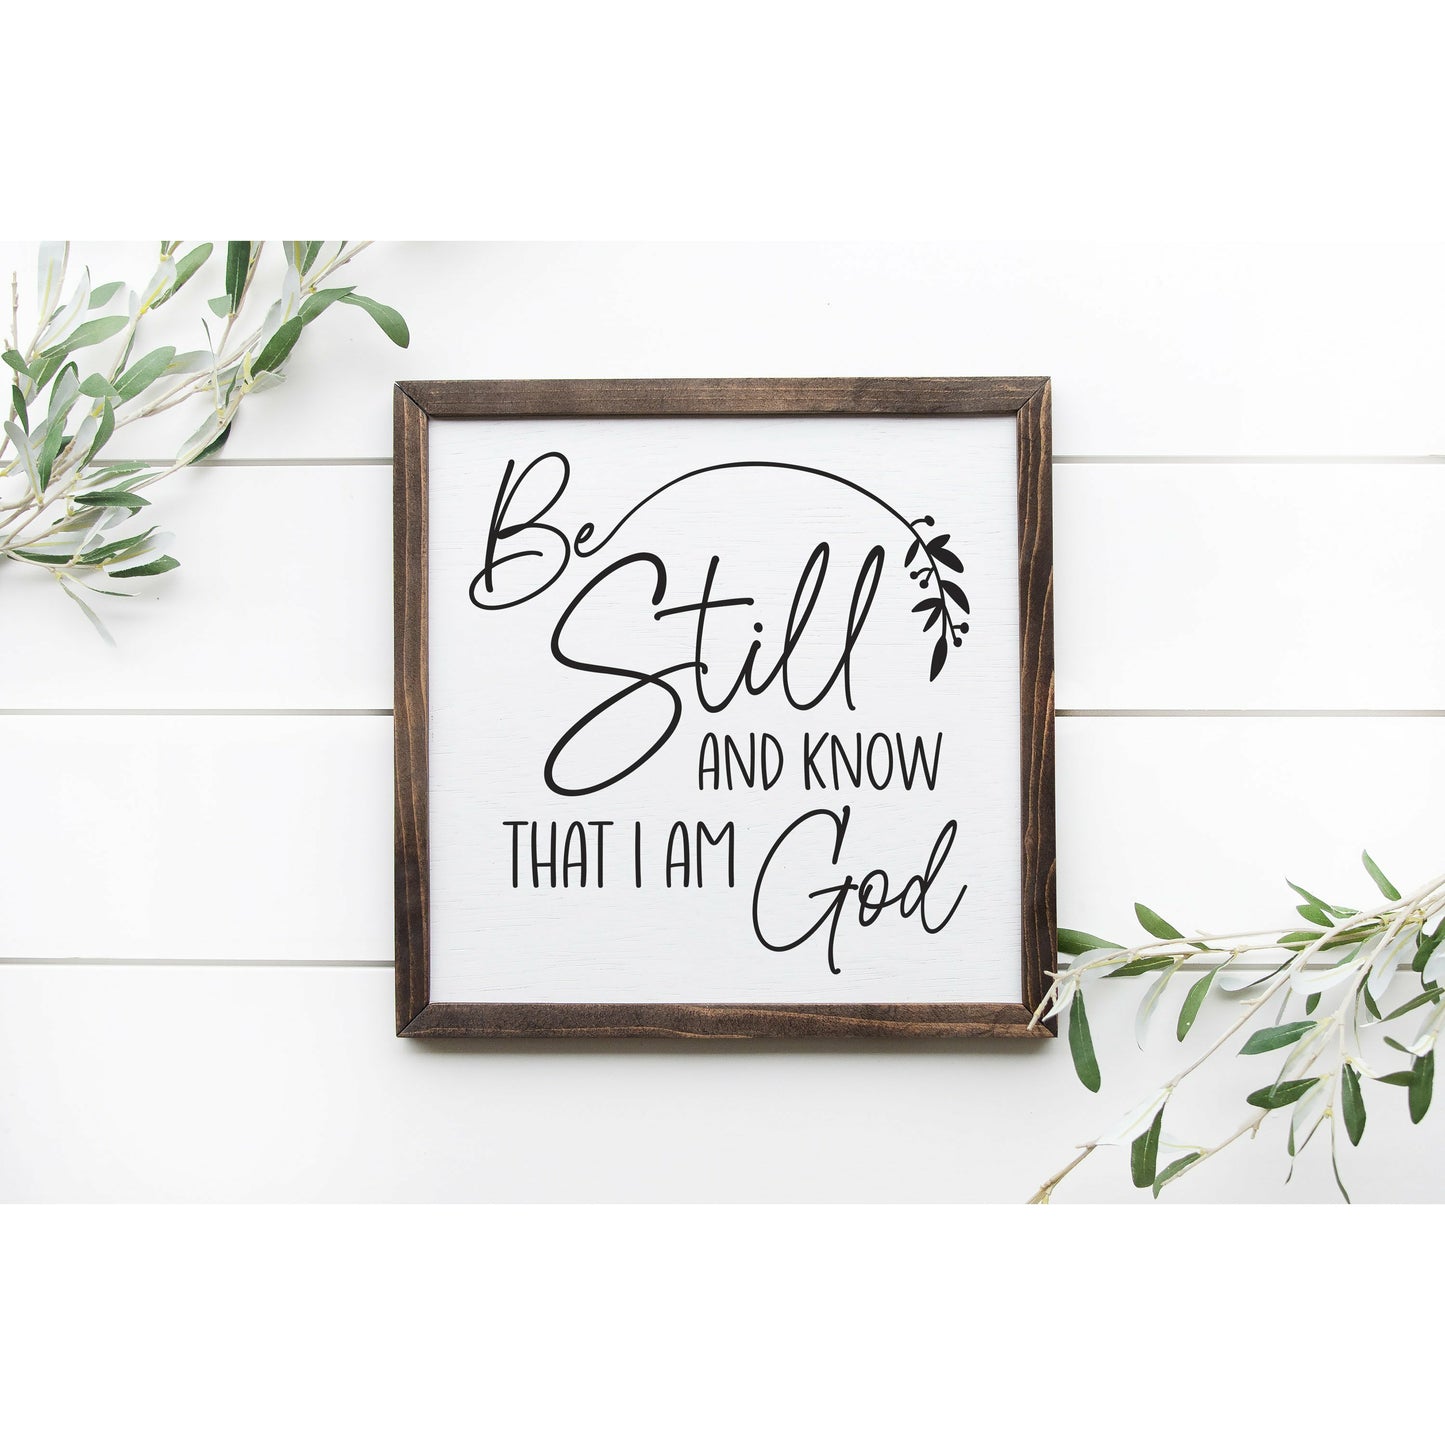 Be Still and Know That I Am God - Rustic Wooden Wall Art Sign